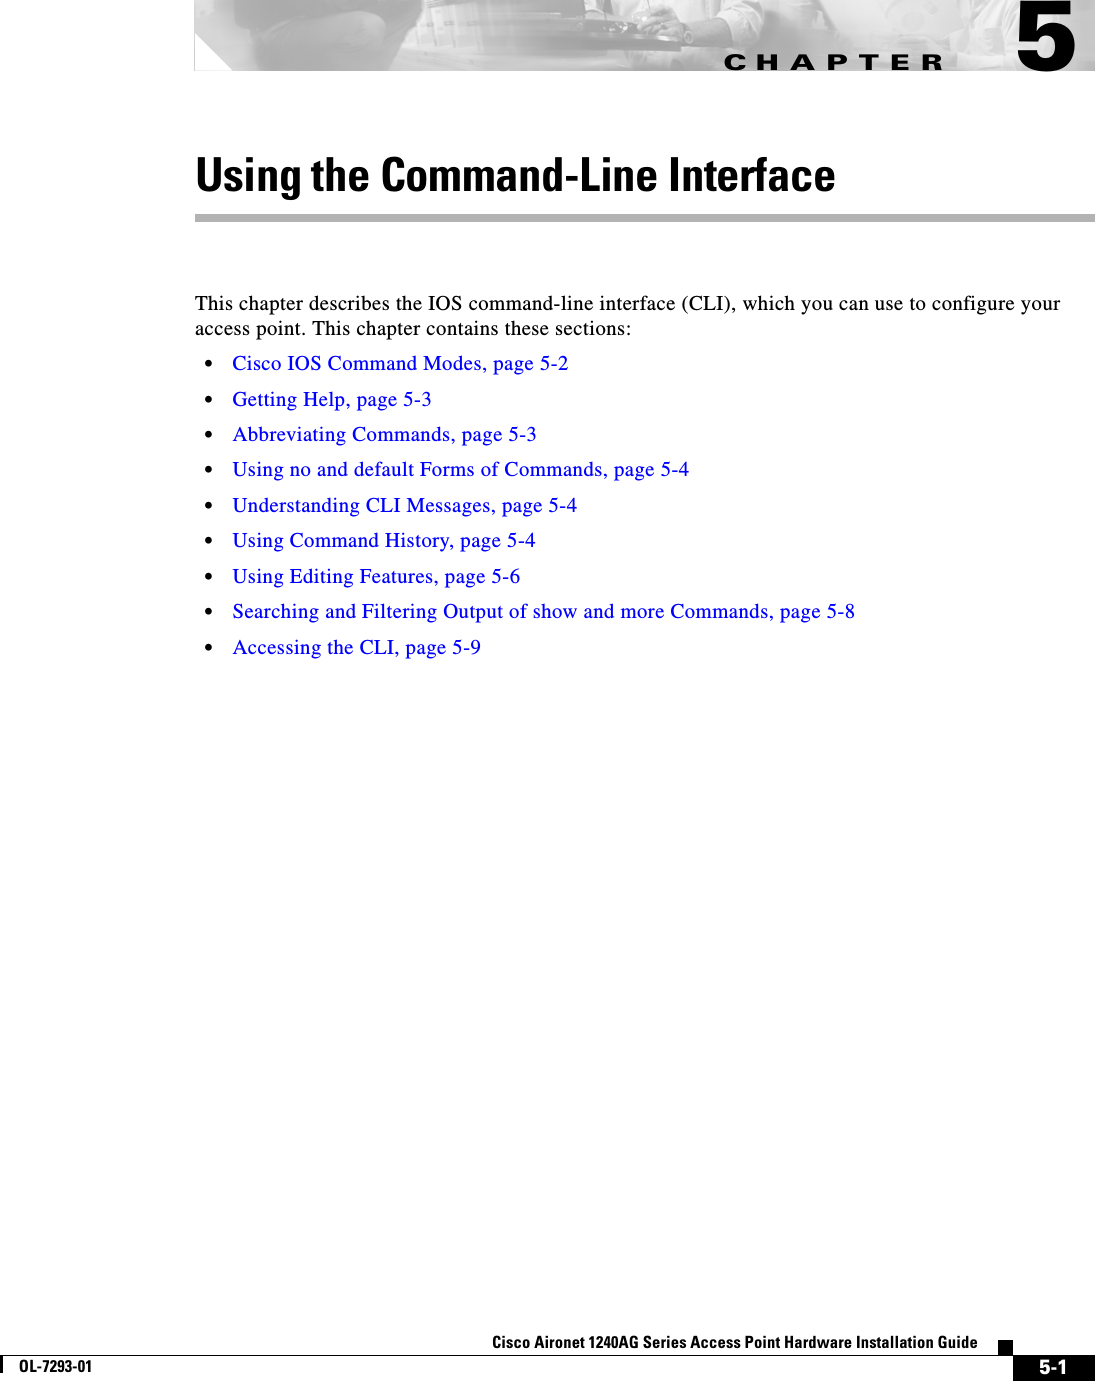 CHAPTER 5-1Cisco Aironet 1240AG Series Access Point Hardware Installation GuideOL-7293-015Using the Command-Line InterfaceThis chapter describes the IOS command-line interface (CLI), which you can use to configure your access point. This chapter contains these sections:•Cisco IOS Command Modes, page 5-2•Getting Help, page 5-3•Abbreviating Commands, page 5-3•Using no and default Forms of Commands, page 5-4•Understanding CLI Messages, page 5-4•Using Command History, page 5-4•Using Editing Features, page 5-6•Searching and Filtering Output of show and more Commands, page 5-8•Accessing the CLI, page 5-9